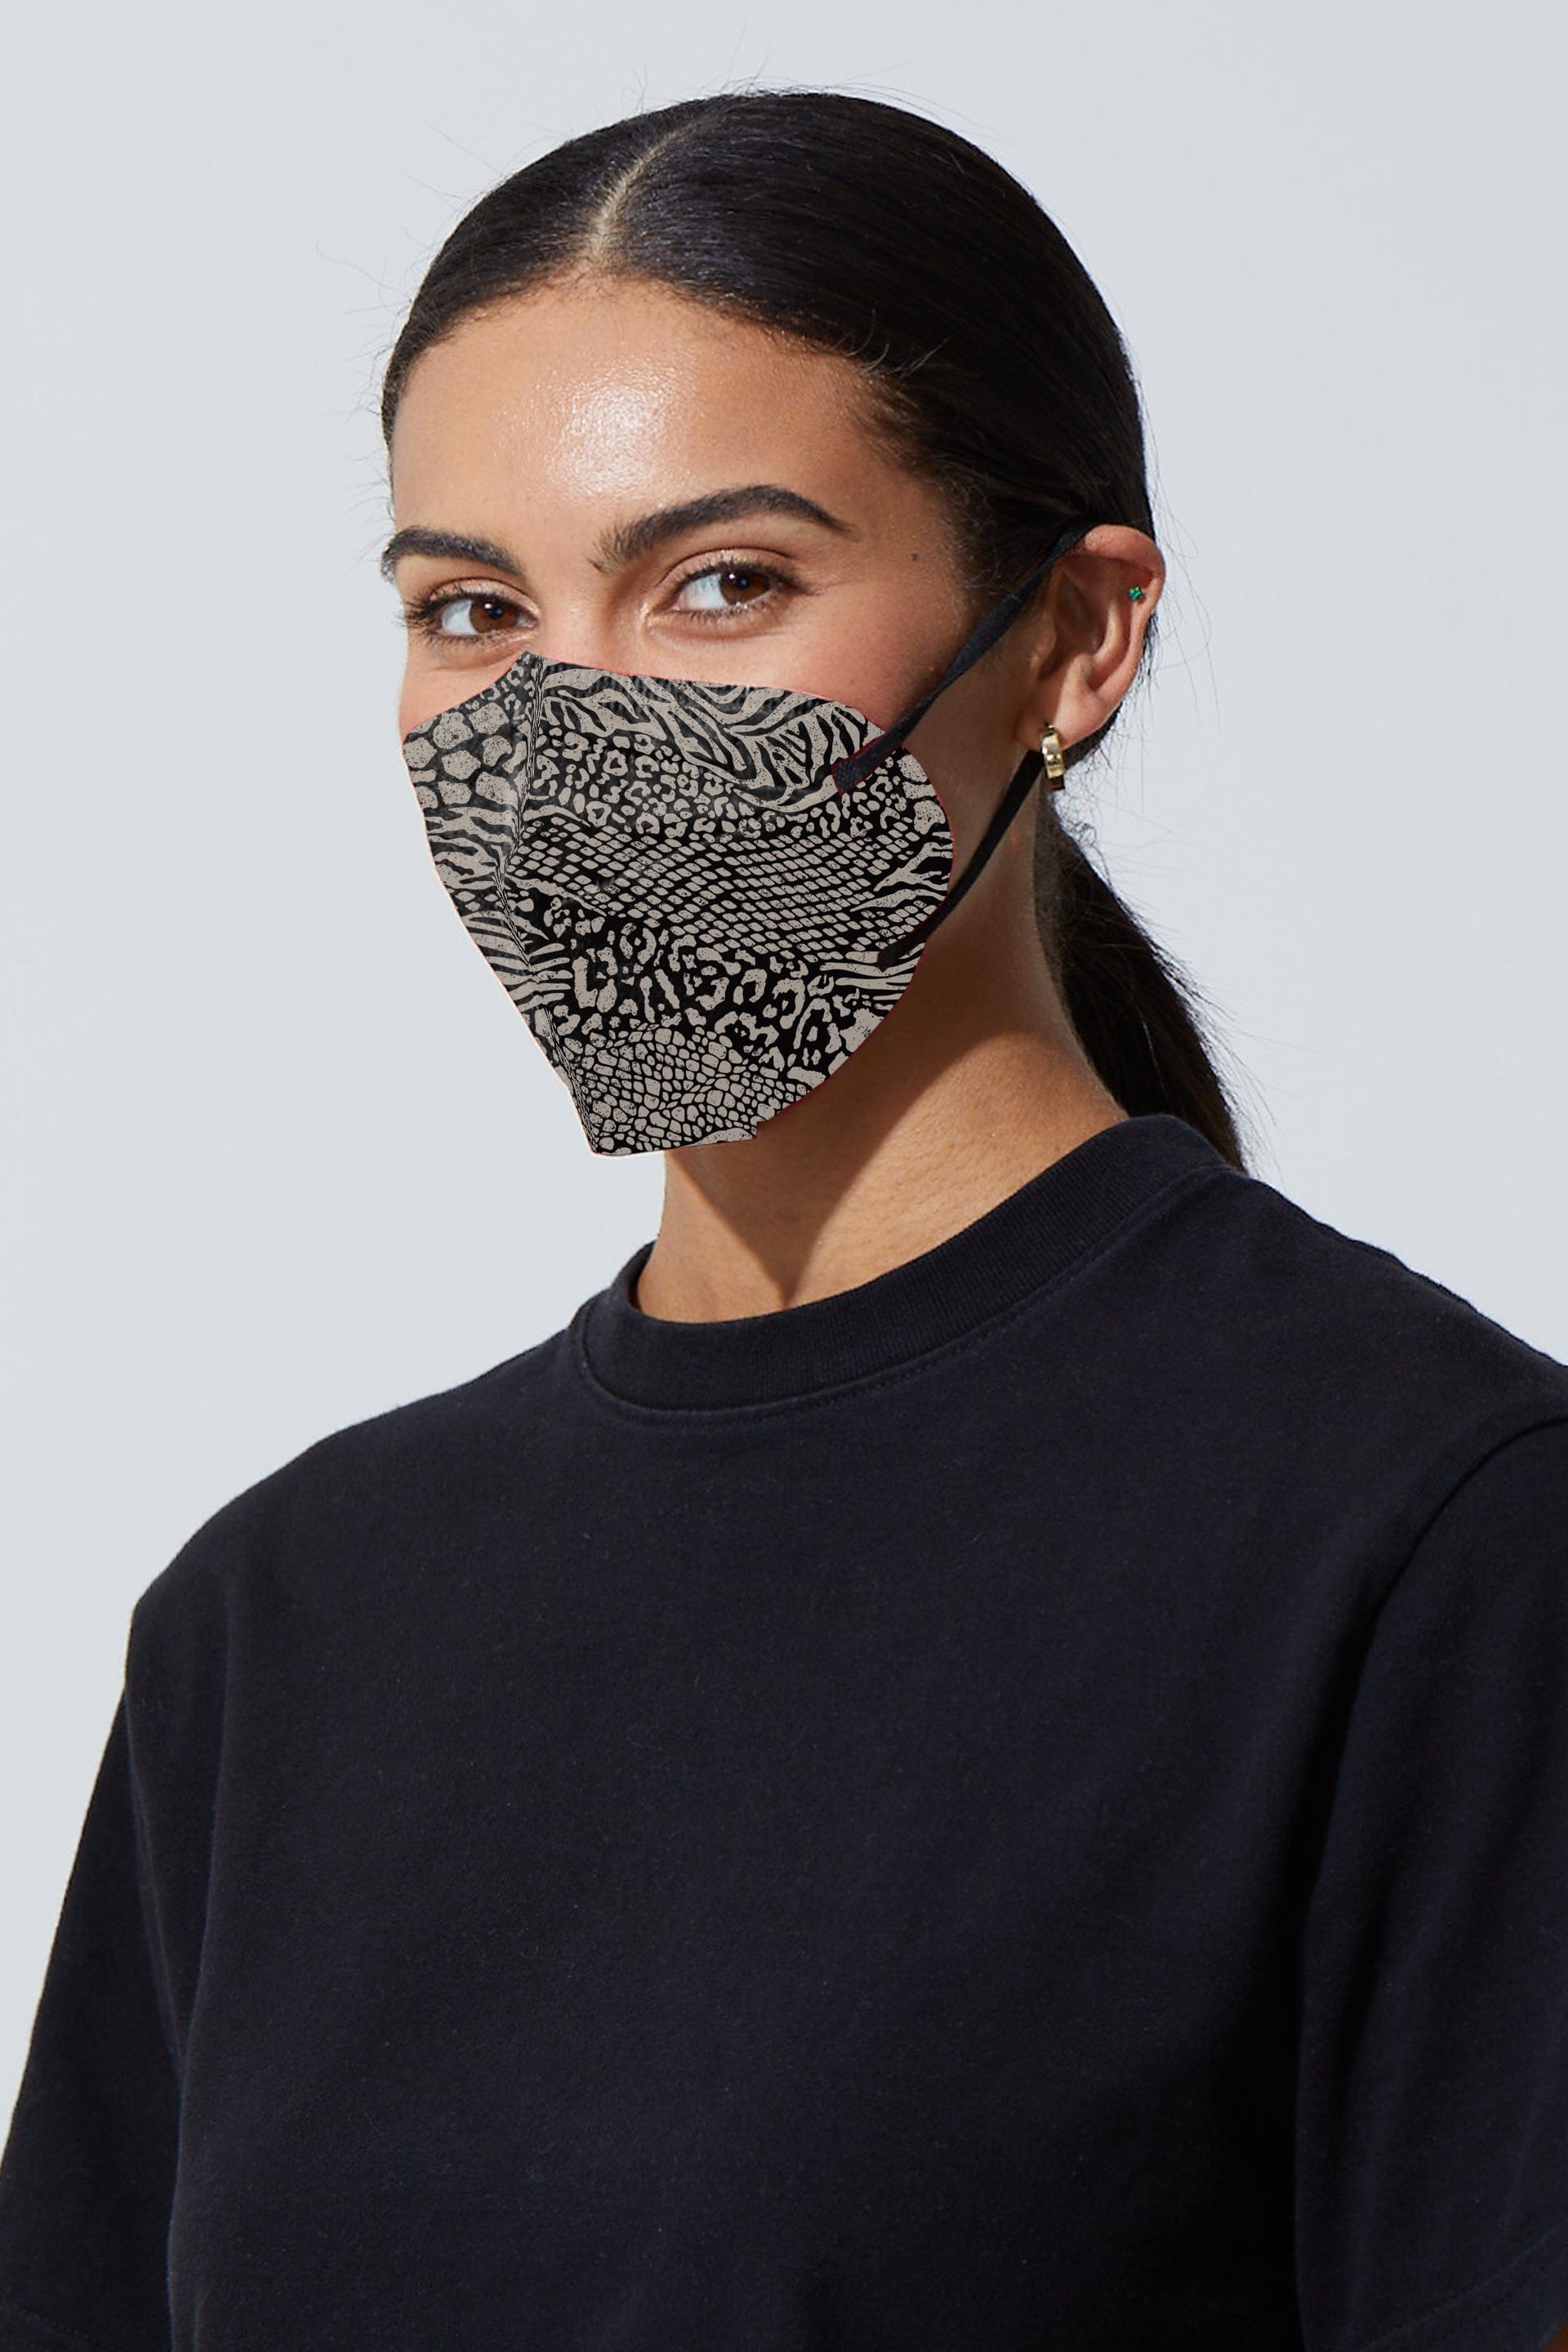 Woman wearing stylish Animal Print KN95 face mask, with high quality breathable fabric. 